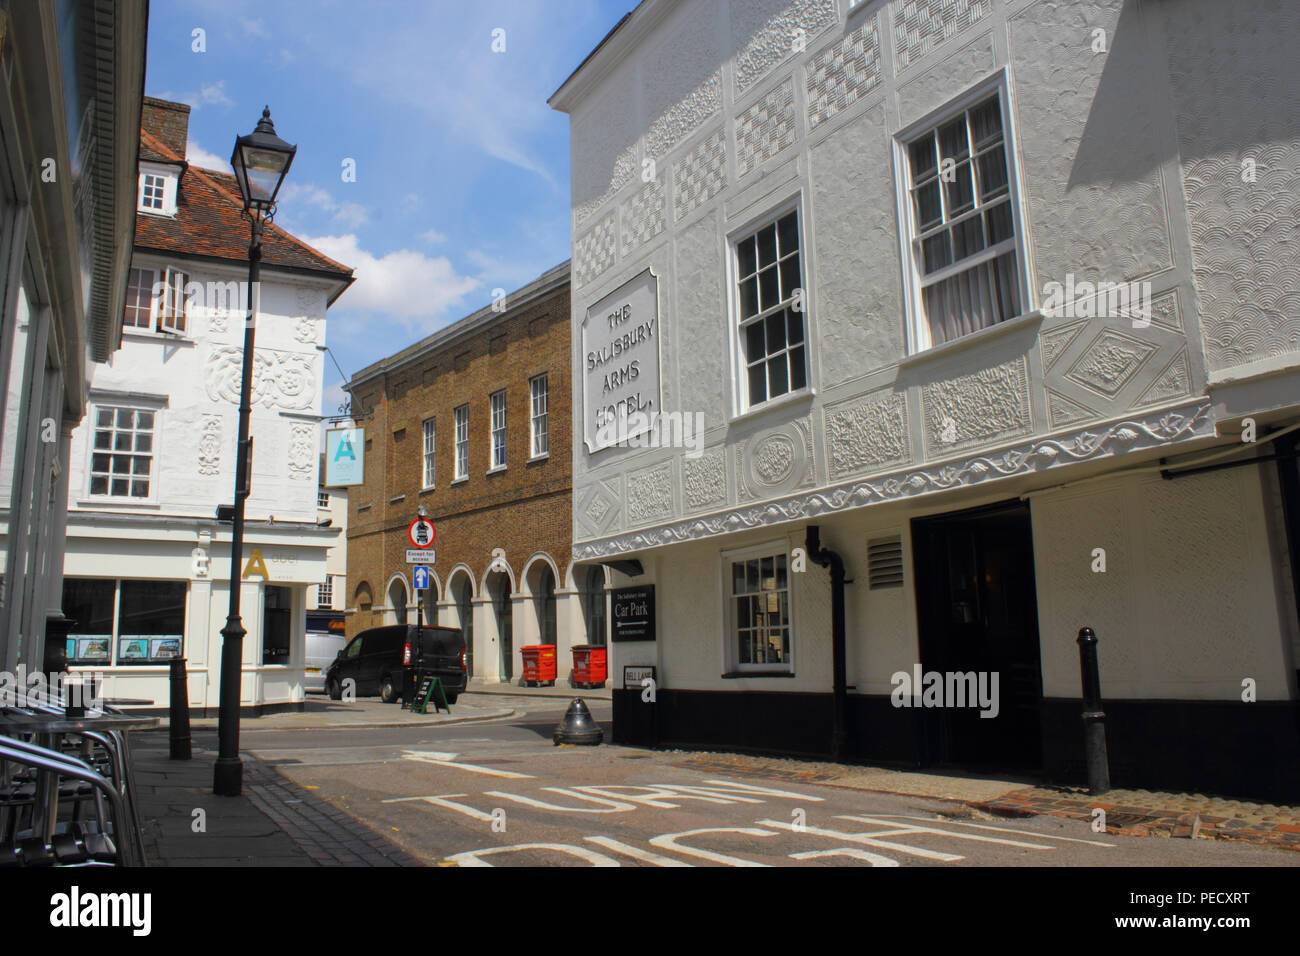 The Salisbury Arms Hotel, Bell Lane, Hertford, Hertfordshire, United Kingdom (featured as a location in the 2018 BBC Drama ‘A Very English Scandal’) Stock Photo